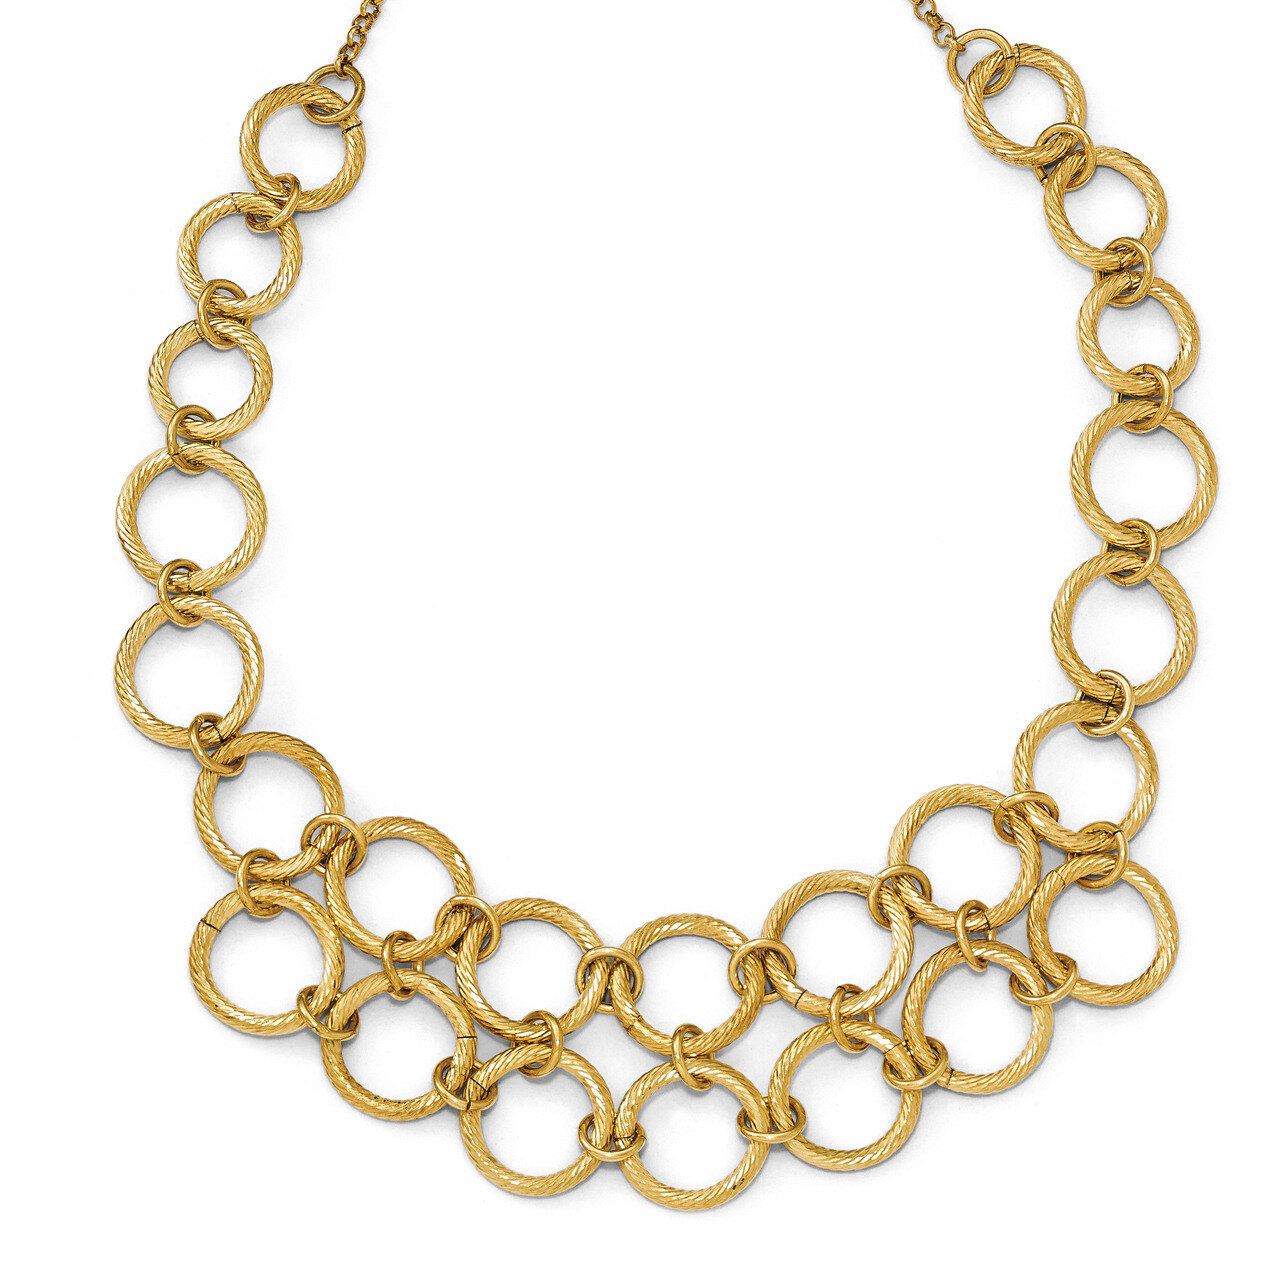 Flash-plated Gold-tone with 1.5 Inch ext. Necklace Sterling Silver QLF537-17